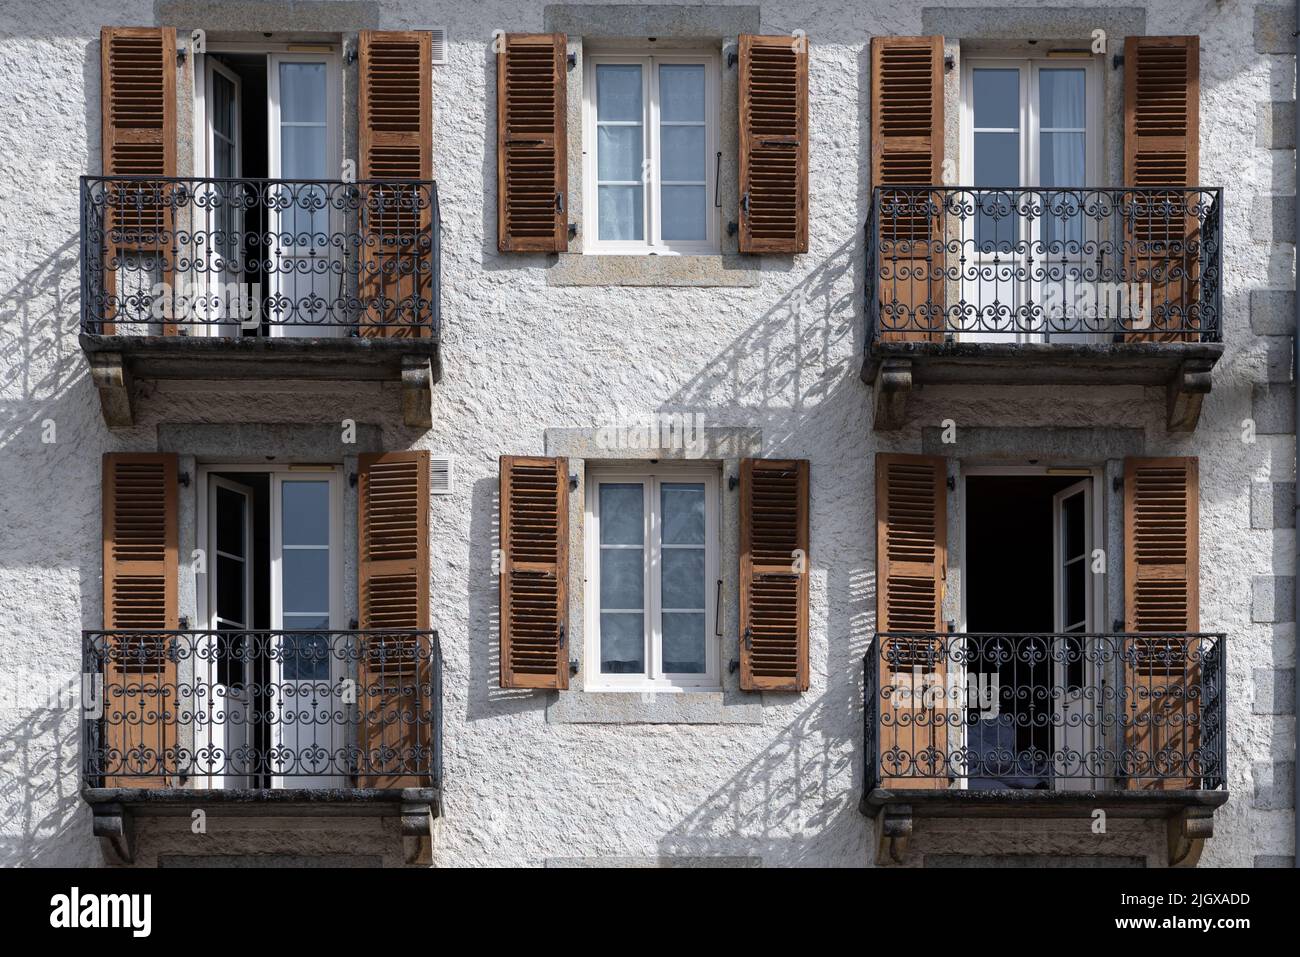 Wrought iron balcony railings with wood shutter doors and windows in rendered wall exterior facade in afternoon sunlight casting shadows on wall in Ch Stock Photo